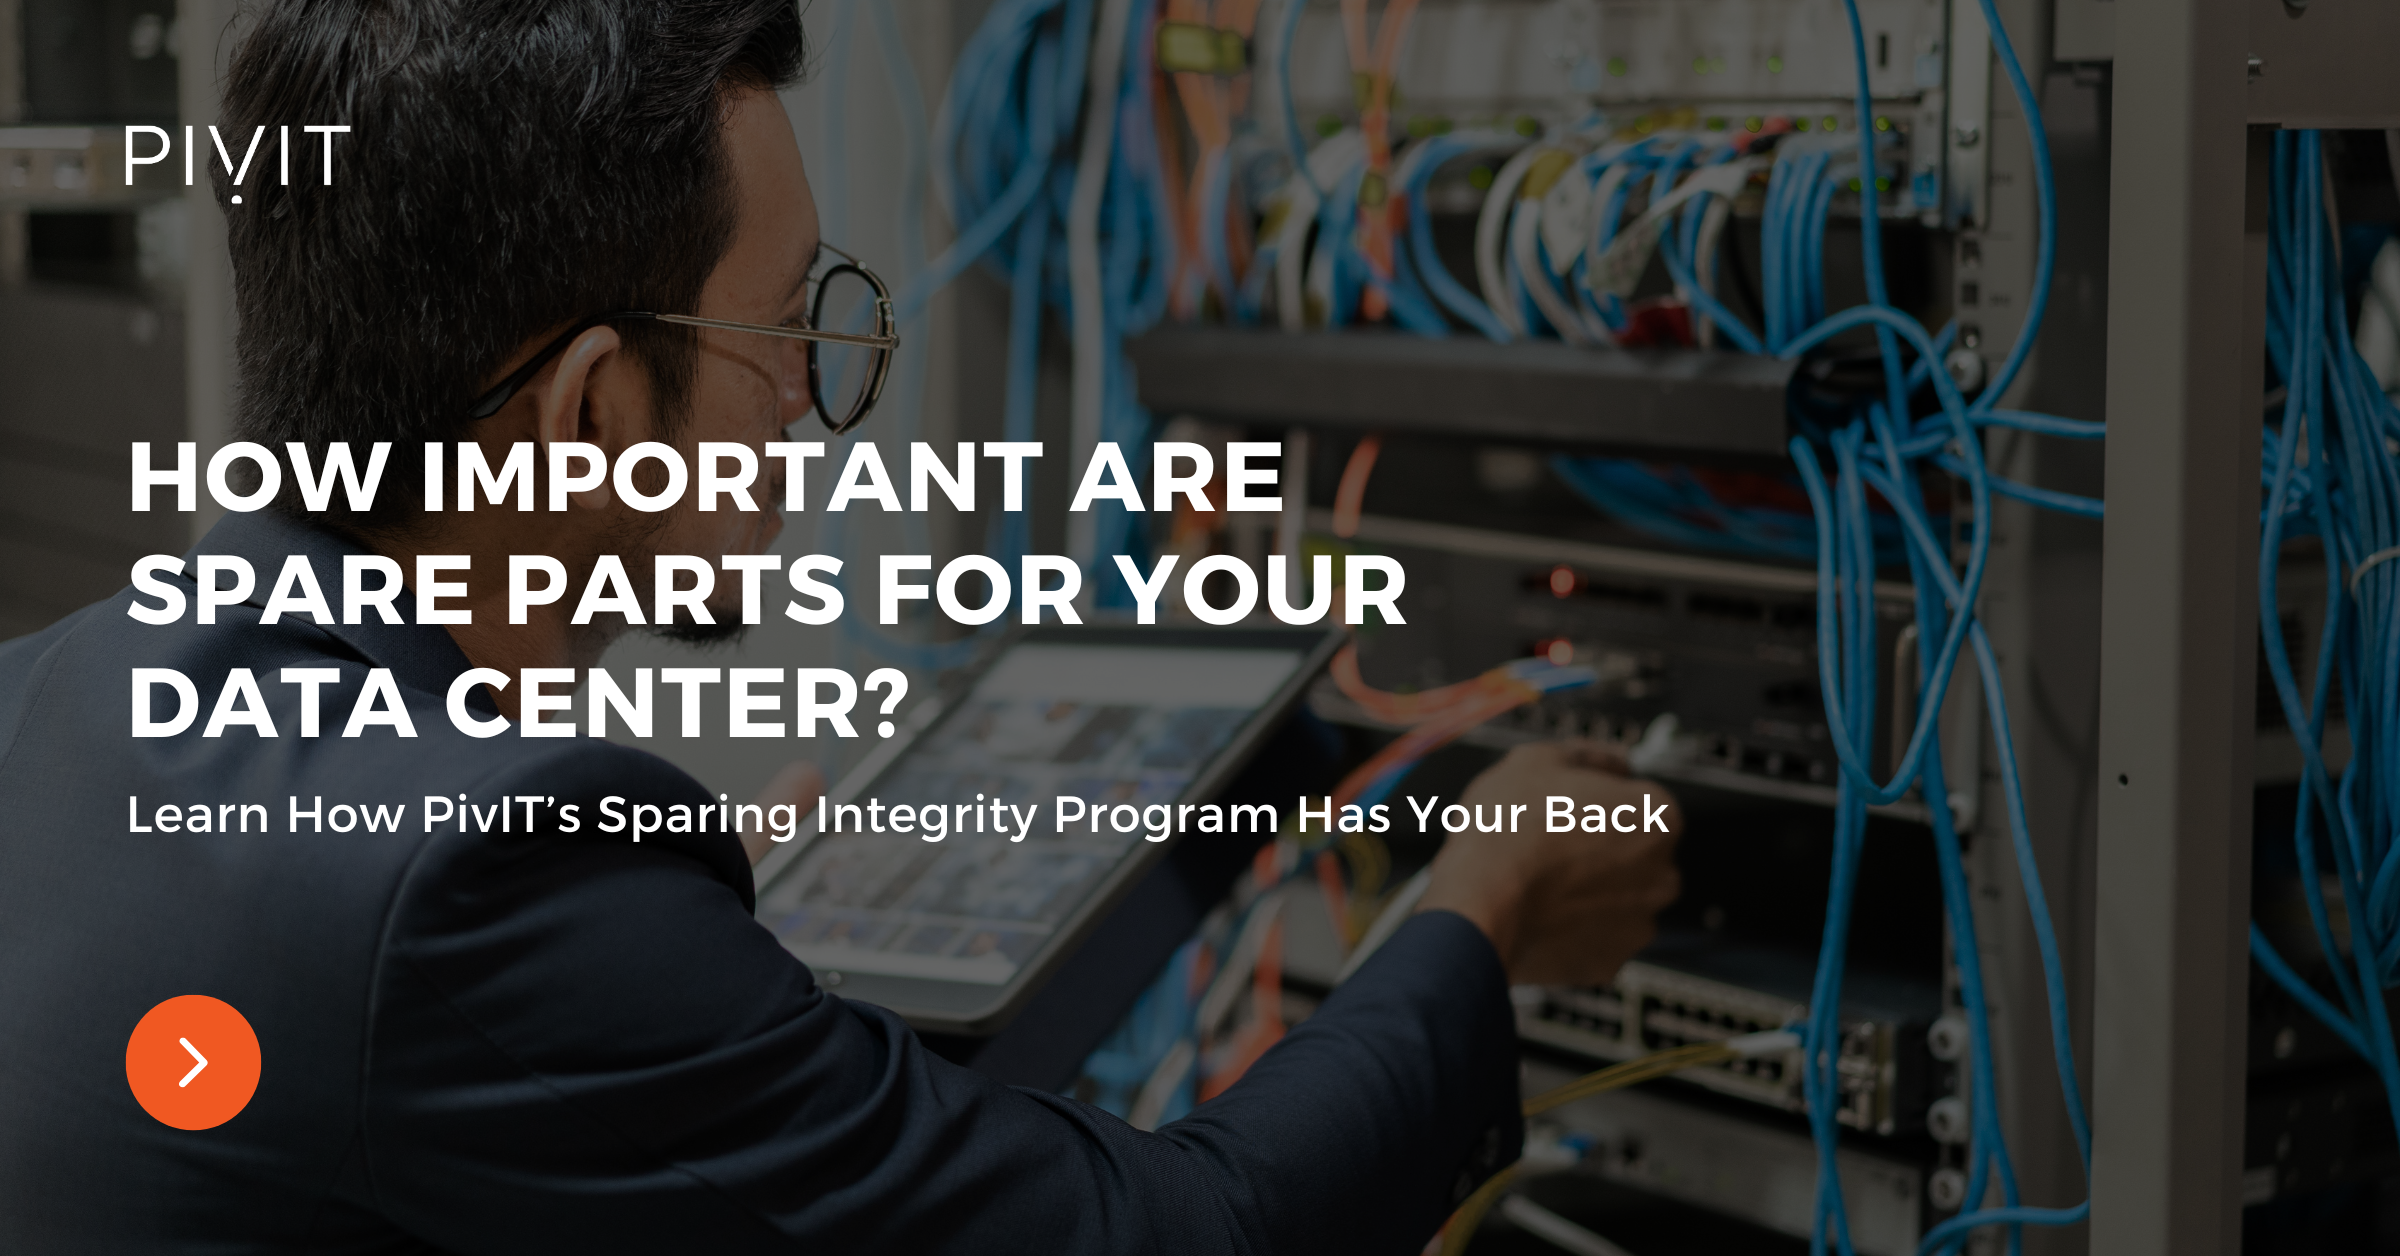 How Important Are Spare Parts for Your Data Center